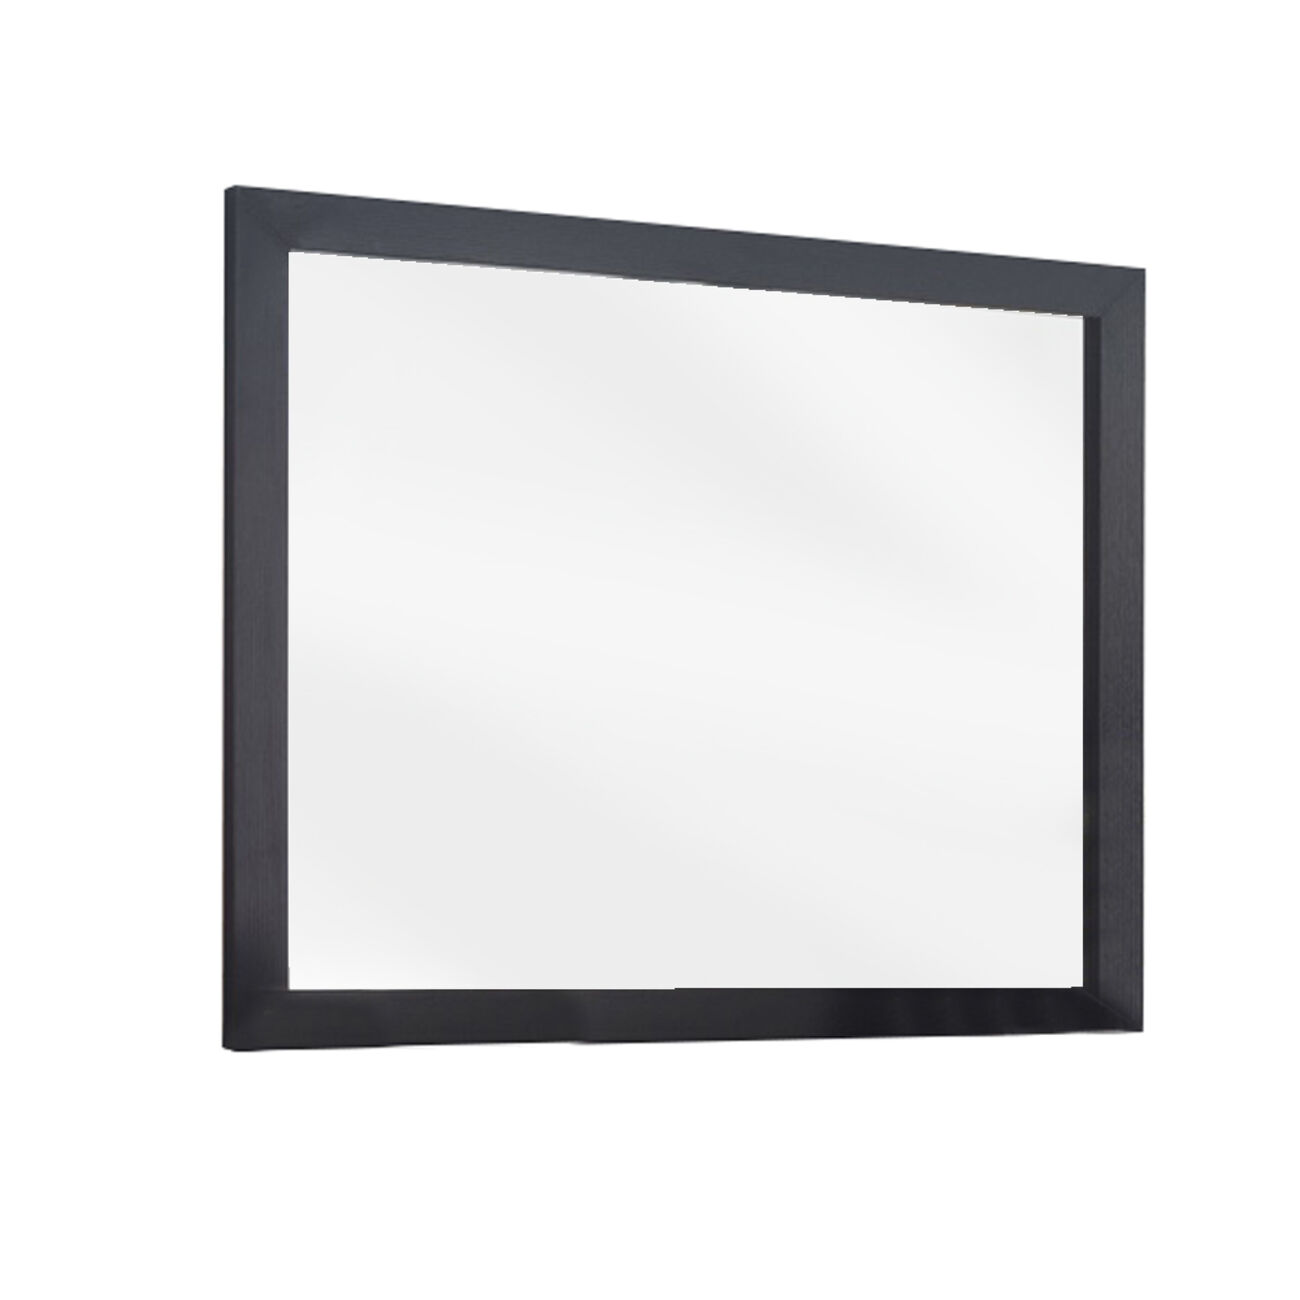 Transitional Style Rectangular Mirror with Wooden Frame, Black and Silver